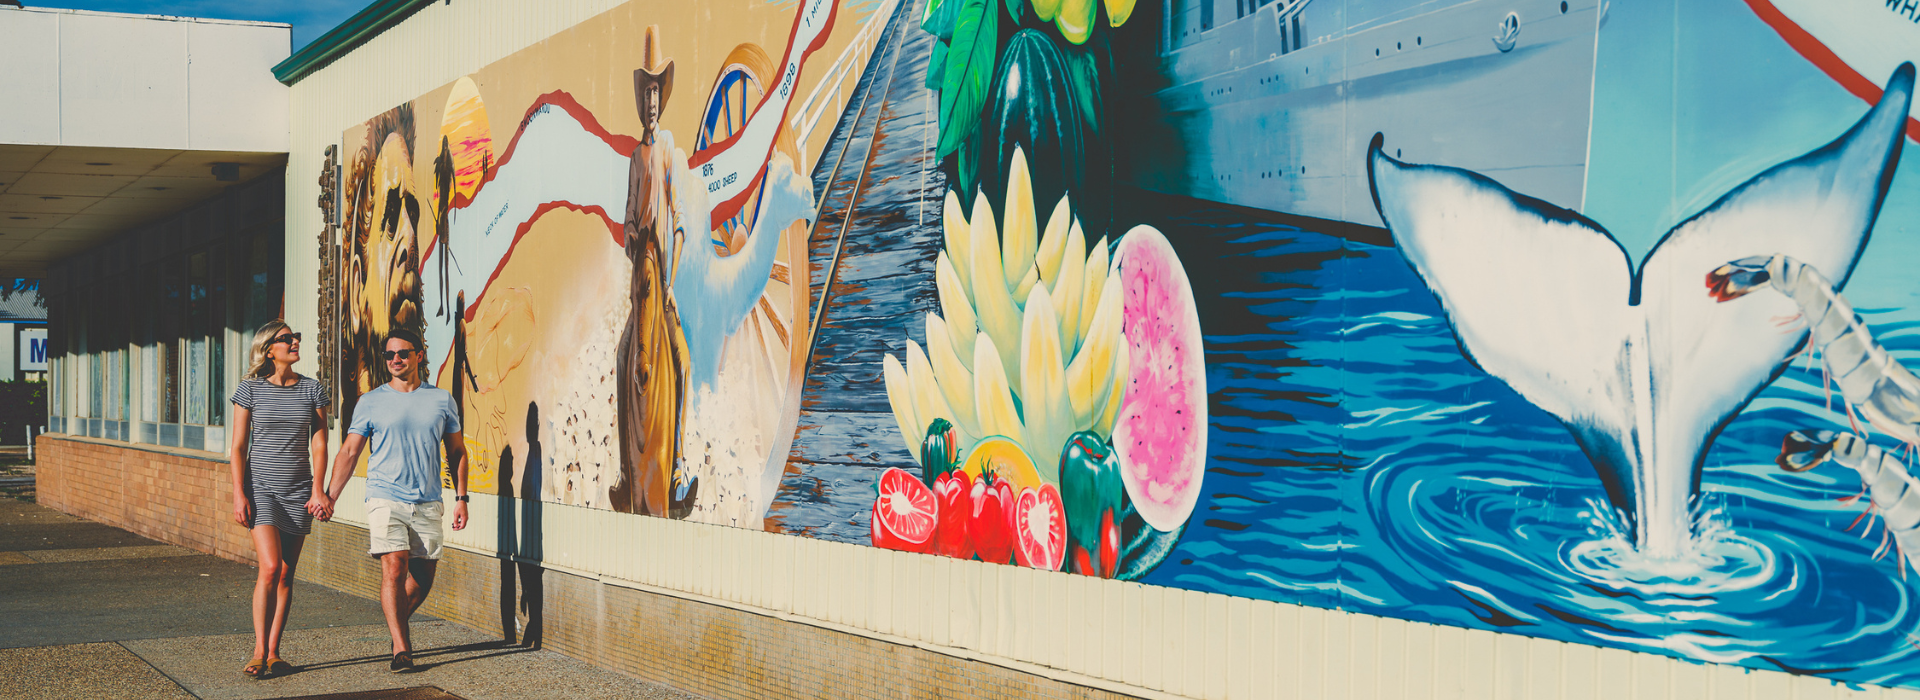 Carnarvon Mural and Art trail Image